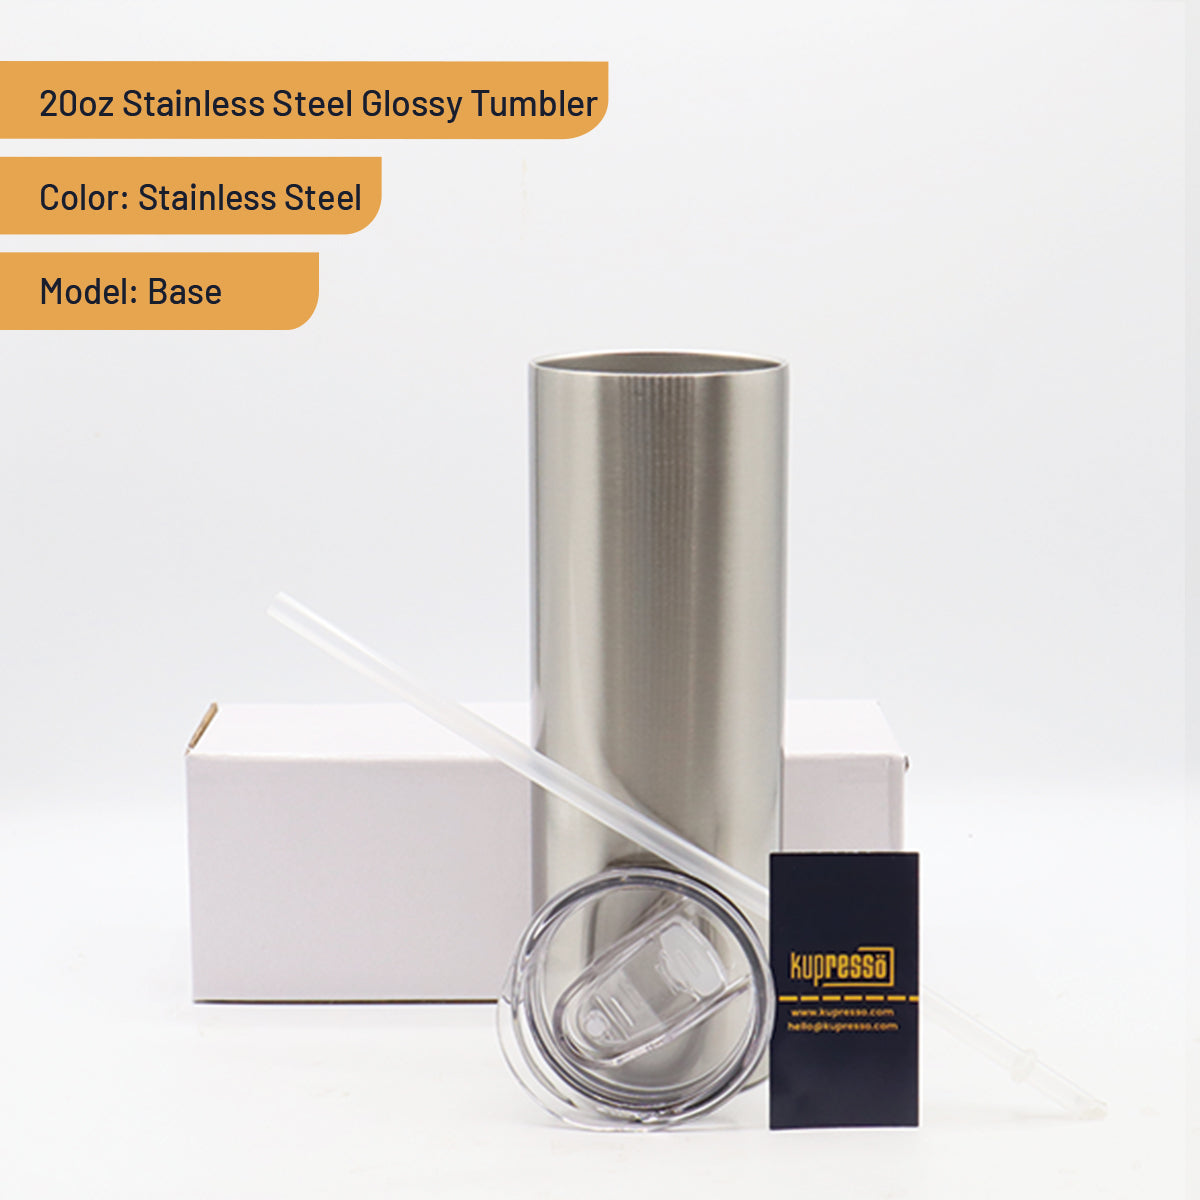 20oz Stainless Steel Glossy Tumbler 20oz Stainless Steel Tumblers Kupresso Base (White Gift Box) Stainless Steel 